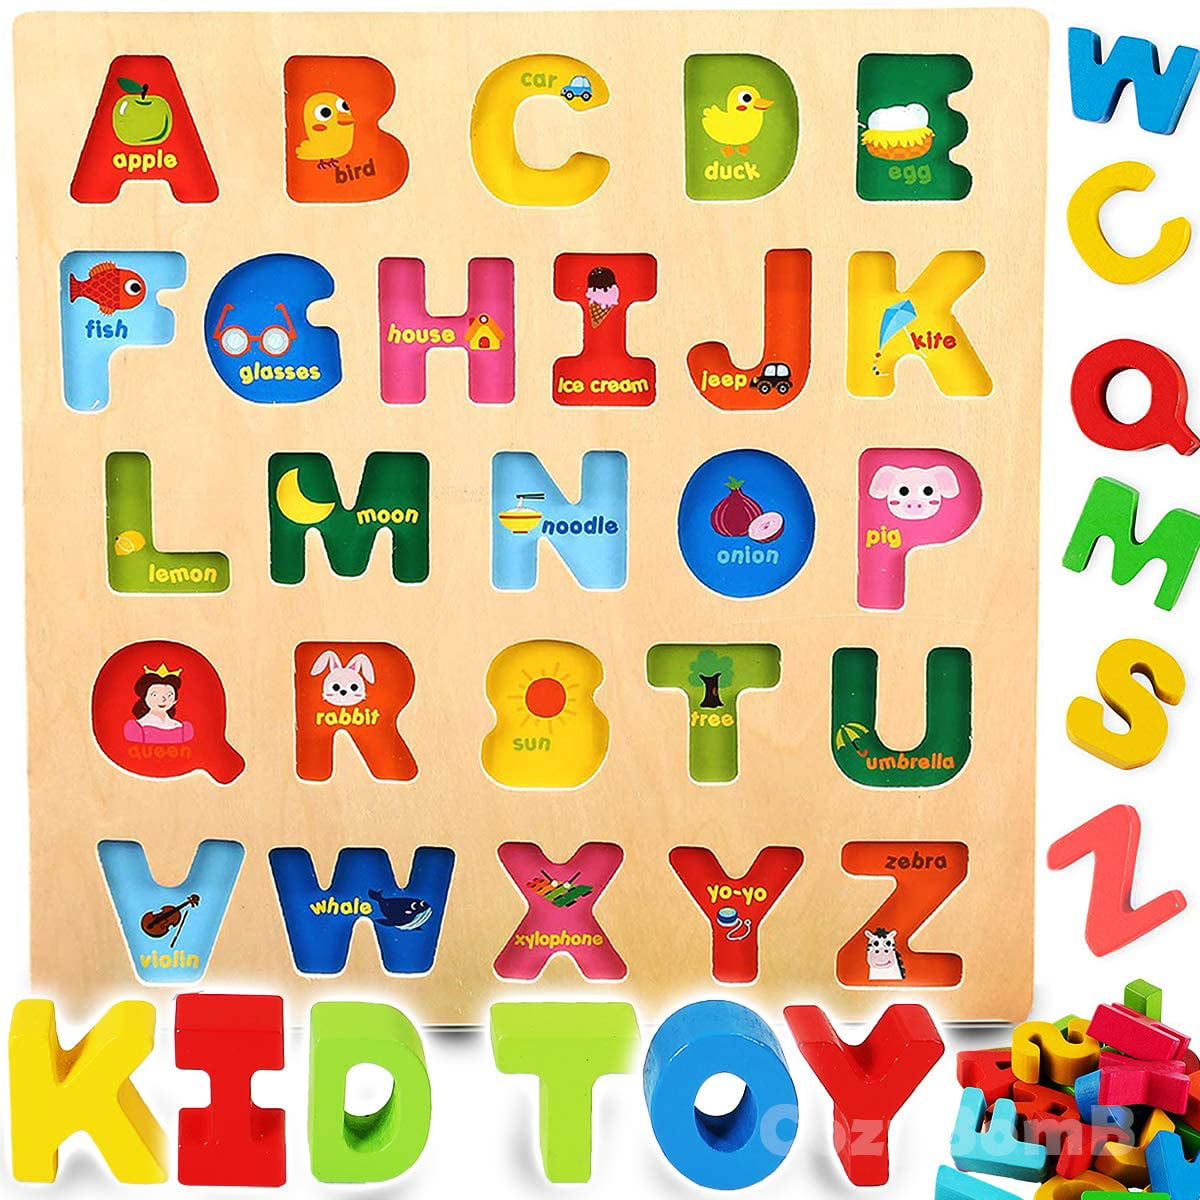 Learning The Abc Games Kids Learning Games Preschool Kindergarten App Phonics Alphabet Toddler Based Abc Apps Montessori Hd Approach Amazon Academy Learn Fun Educational